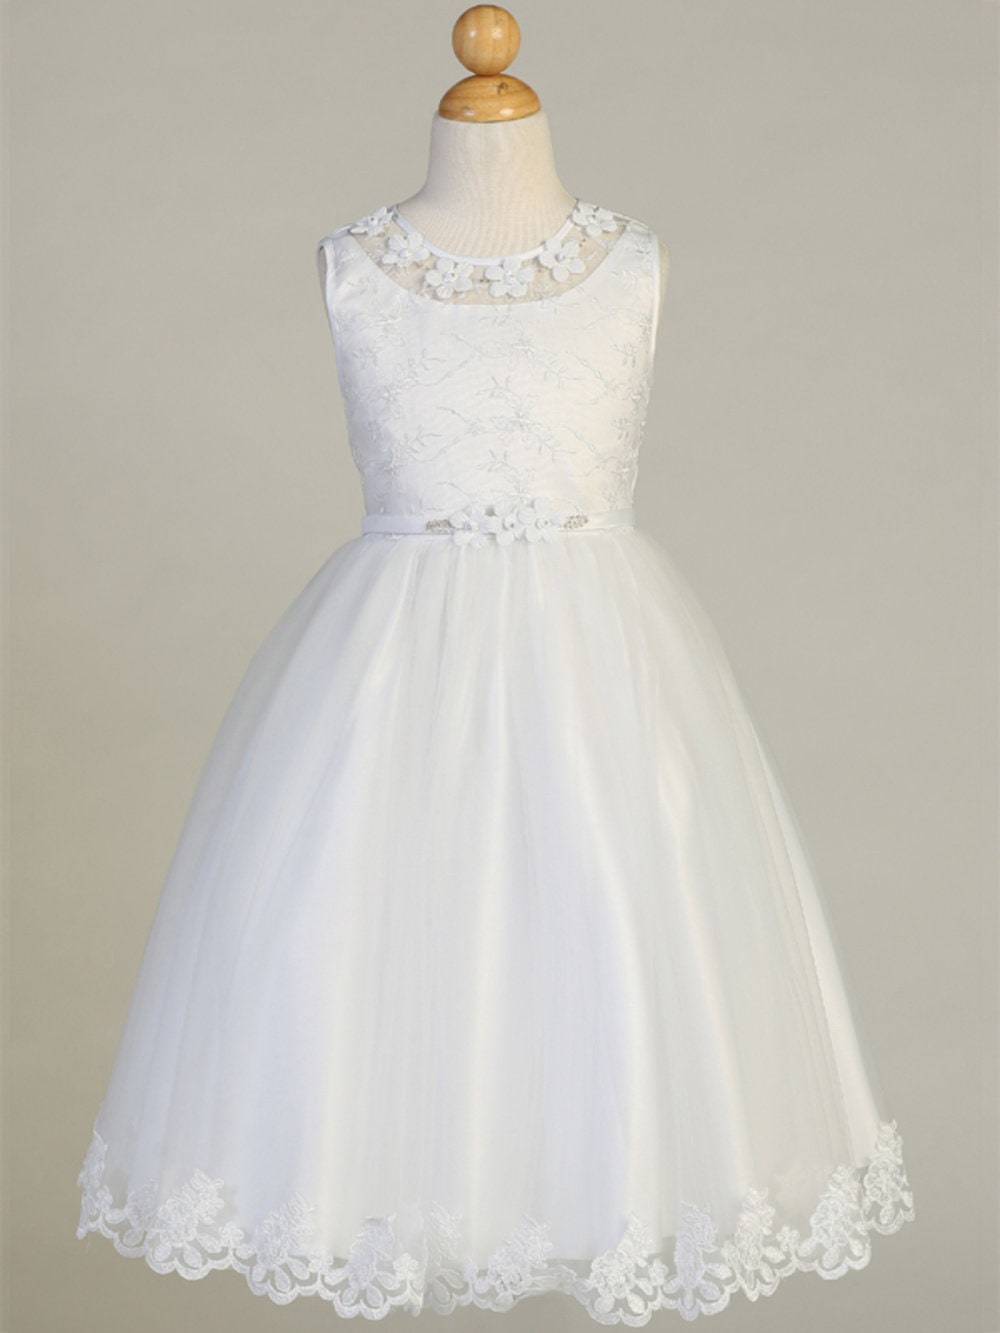 A full-length view of the First Communion Dress showing the tea-length and elegant silhouette.